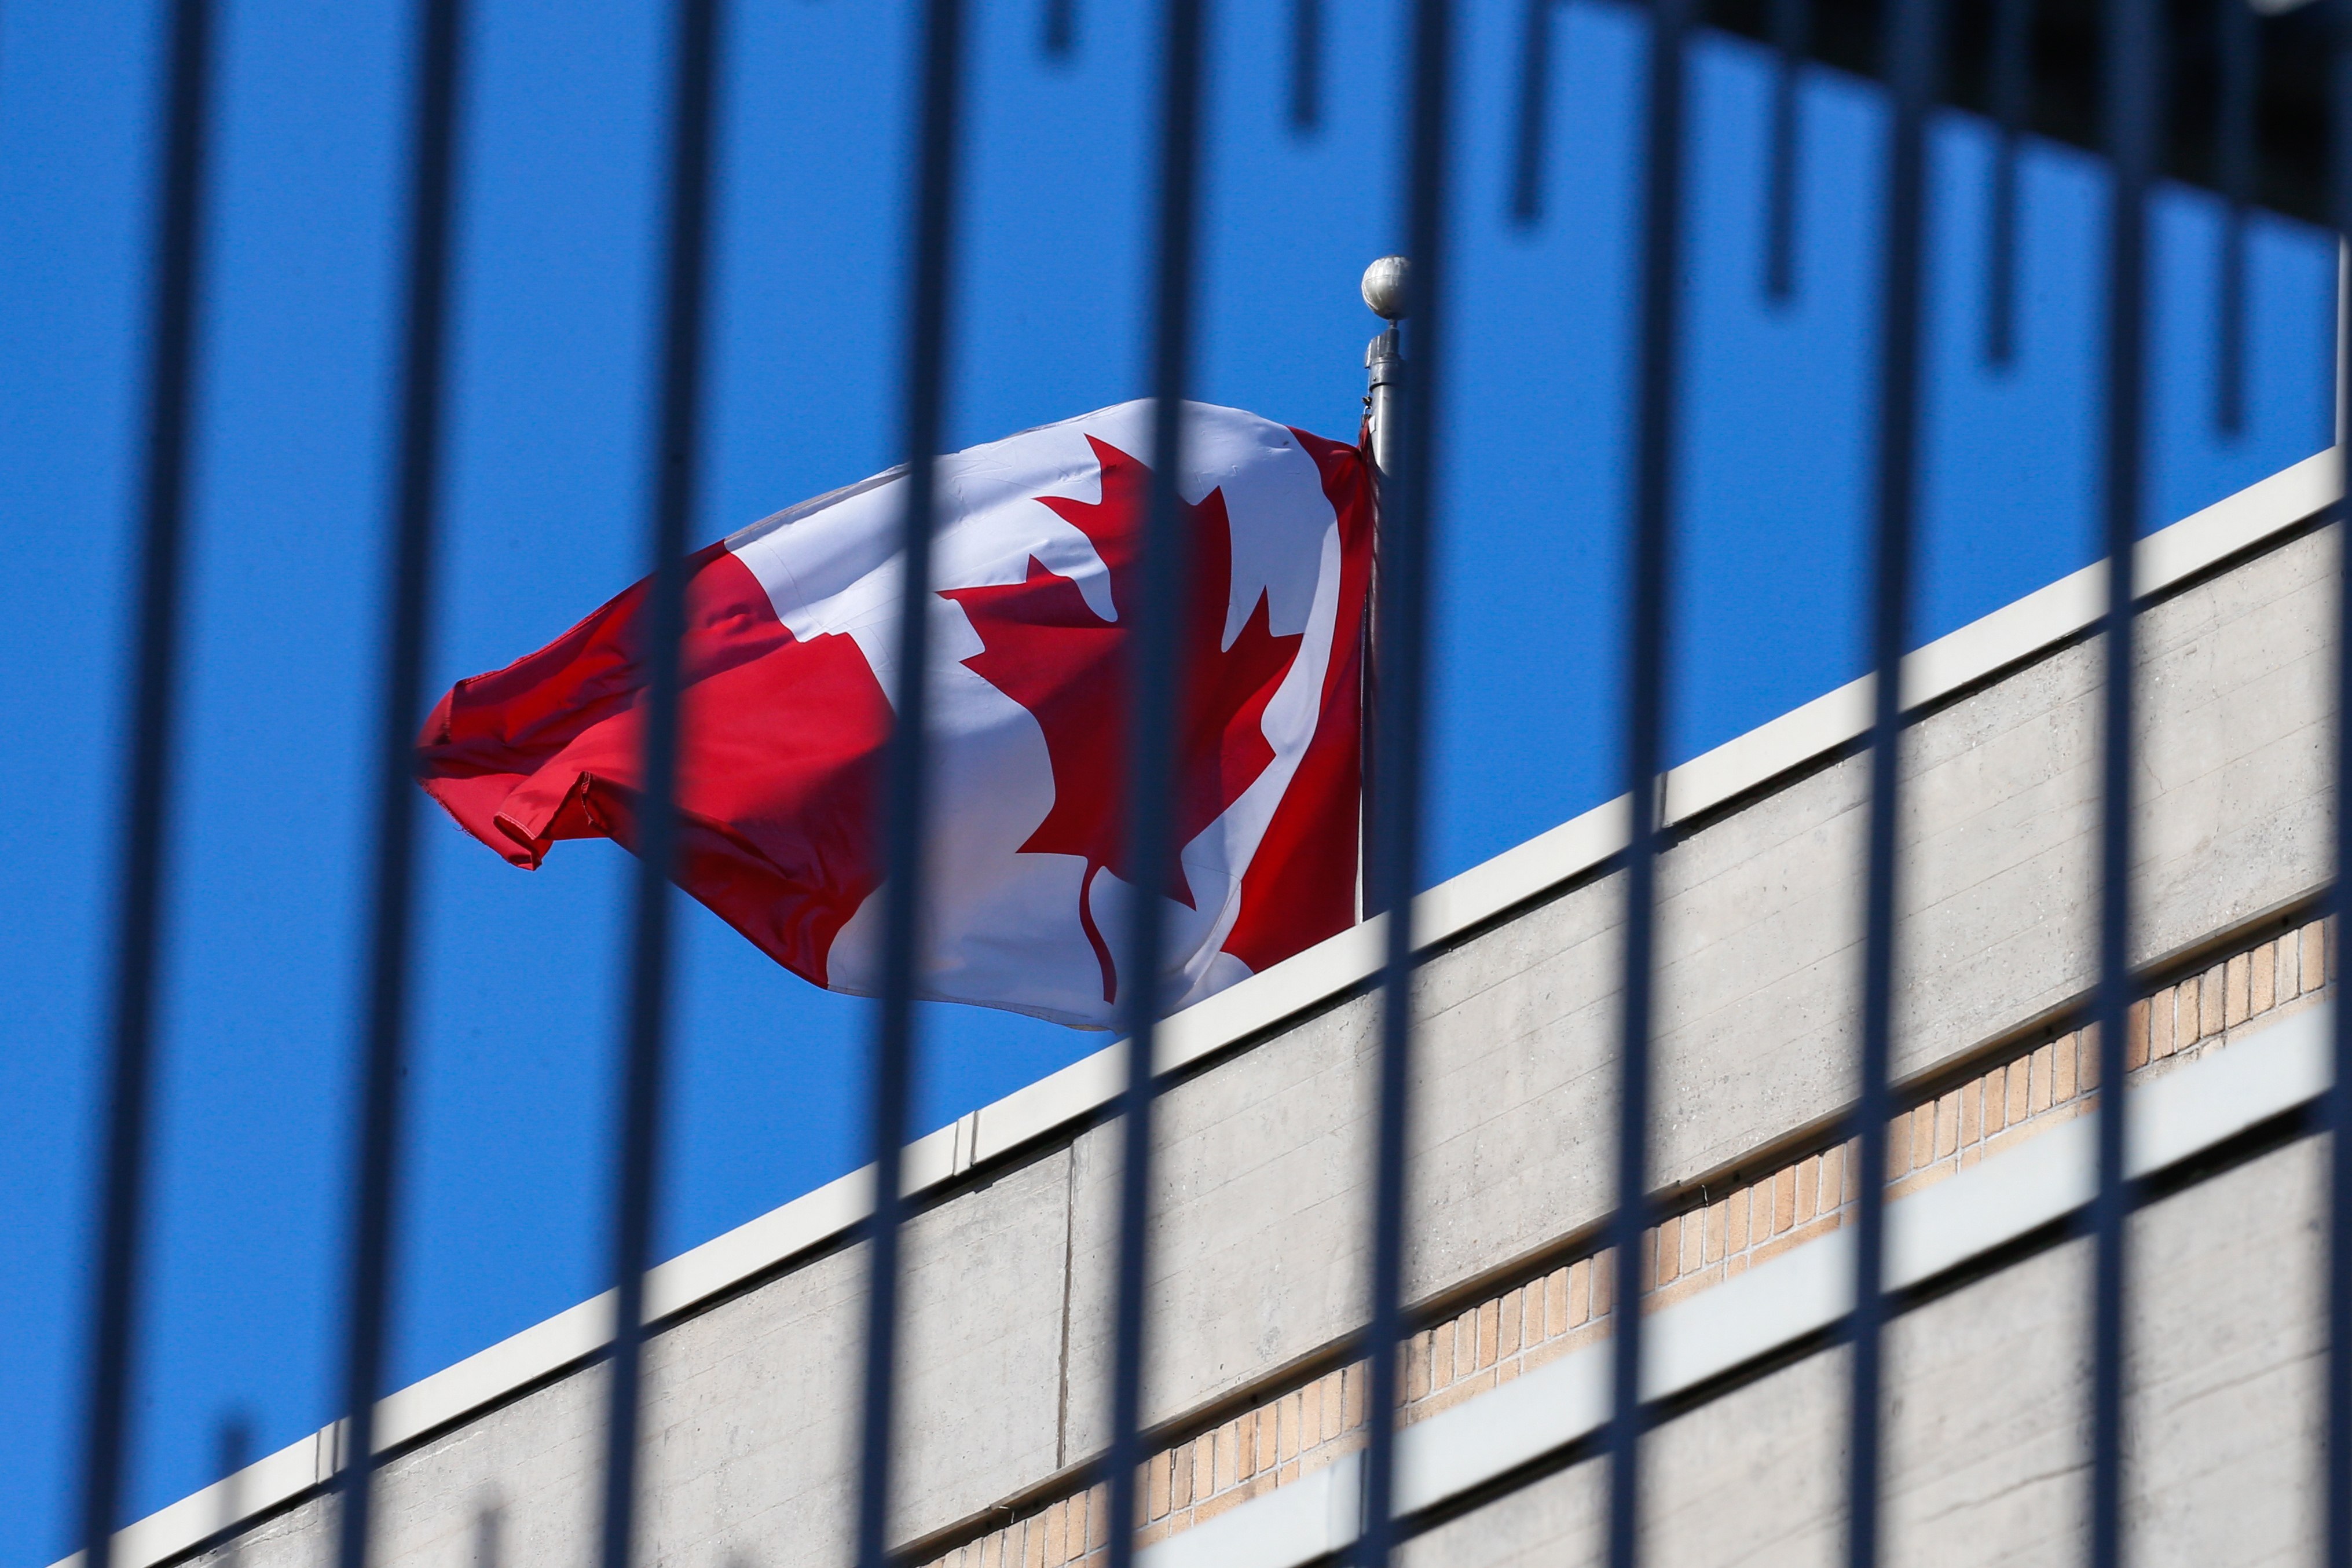 A Canadian flag flies at the Canadian embassy in Beijing in January 2019. A group of Canadian lawmakers recently joined a grouping aimed at strengthening ties with Taiwan, in a move that’s sure to irk Beijing. Photo: EPA-EFE